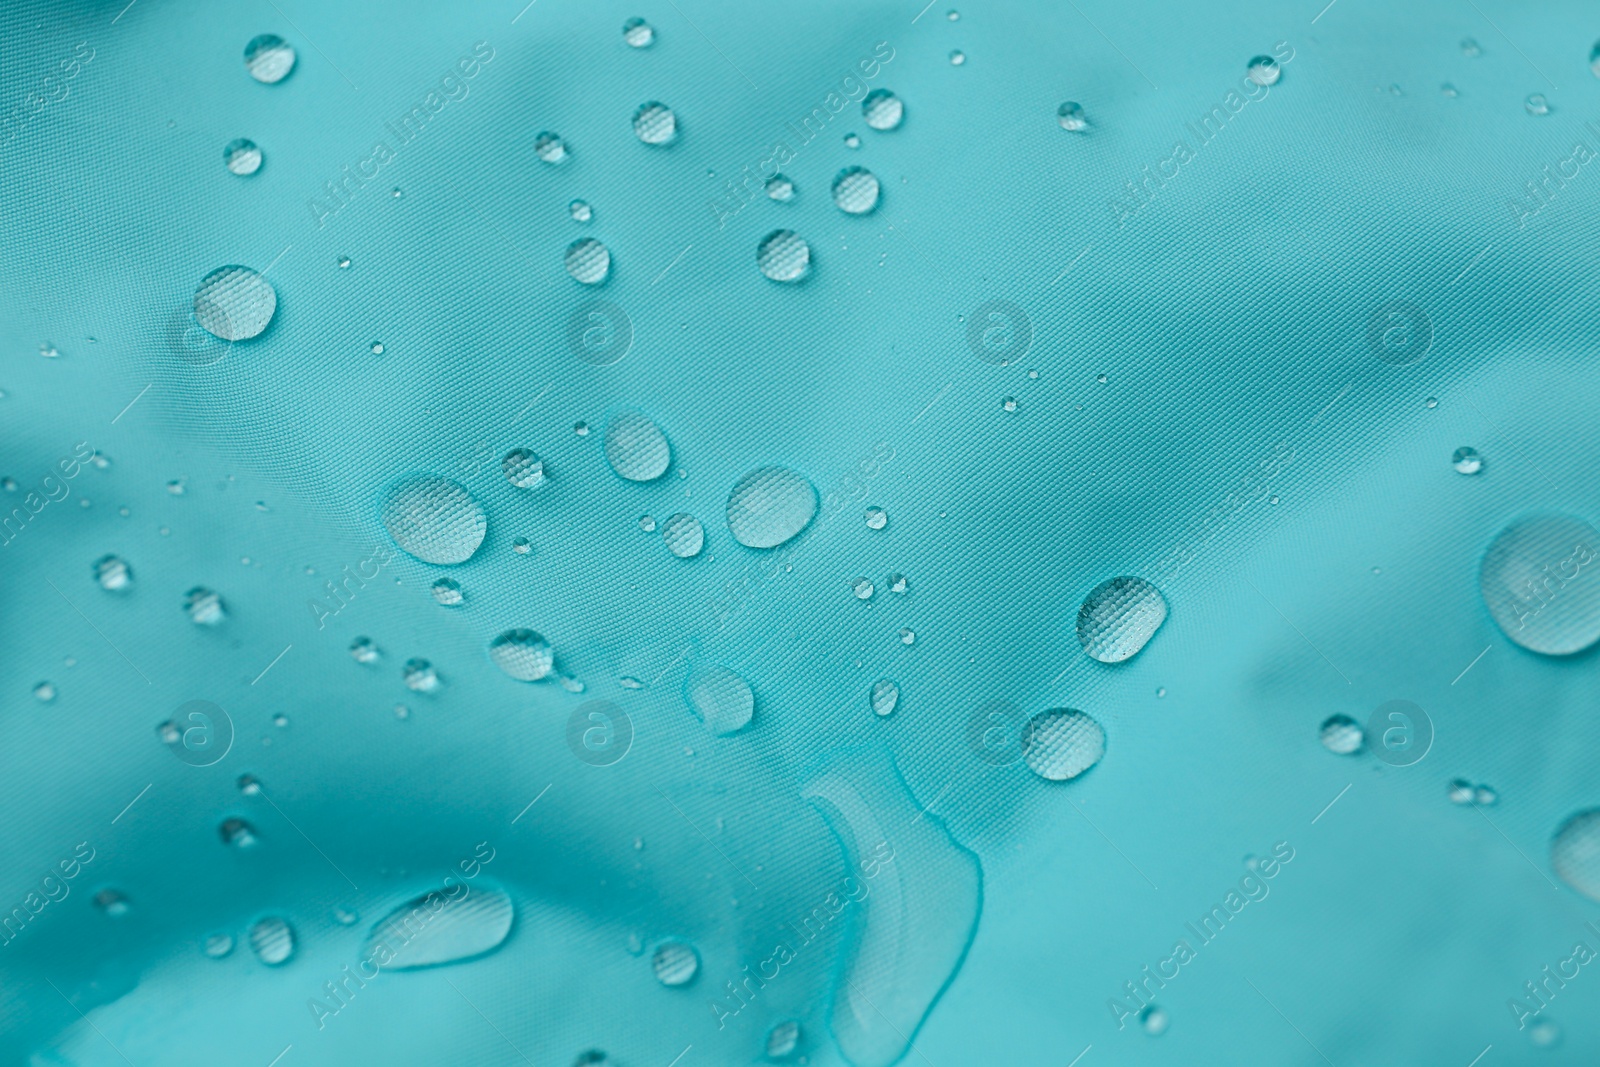 Photo of Turquoise waterproof fabric with water drops as background, closeup